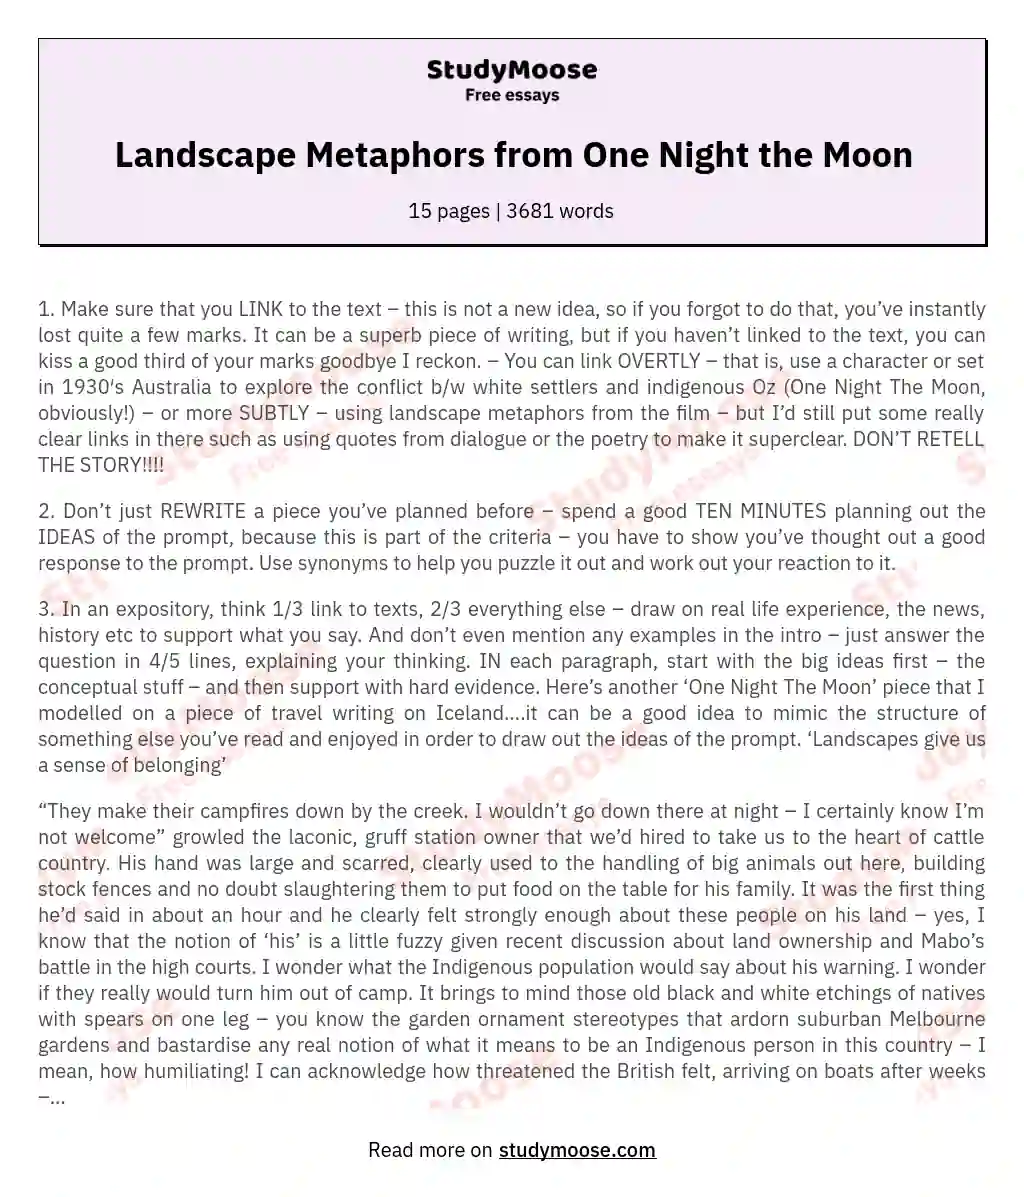 Landscape Metaphors from One Night the Moon essay